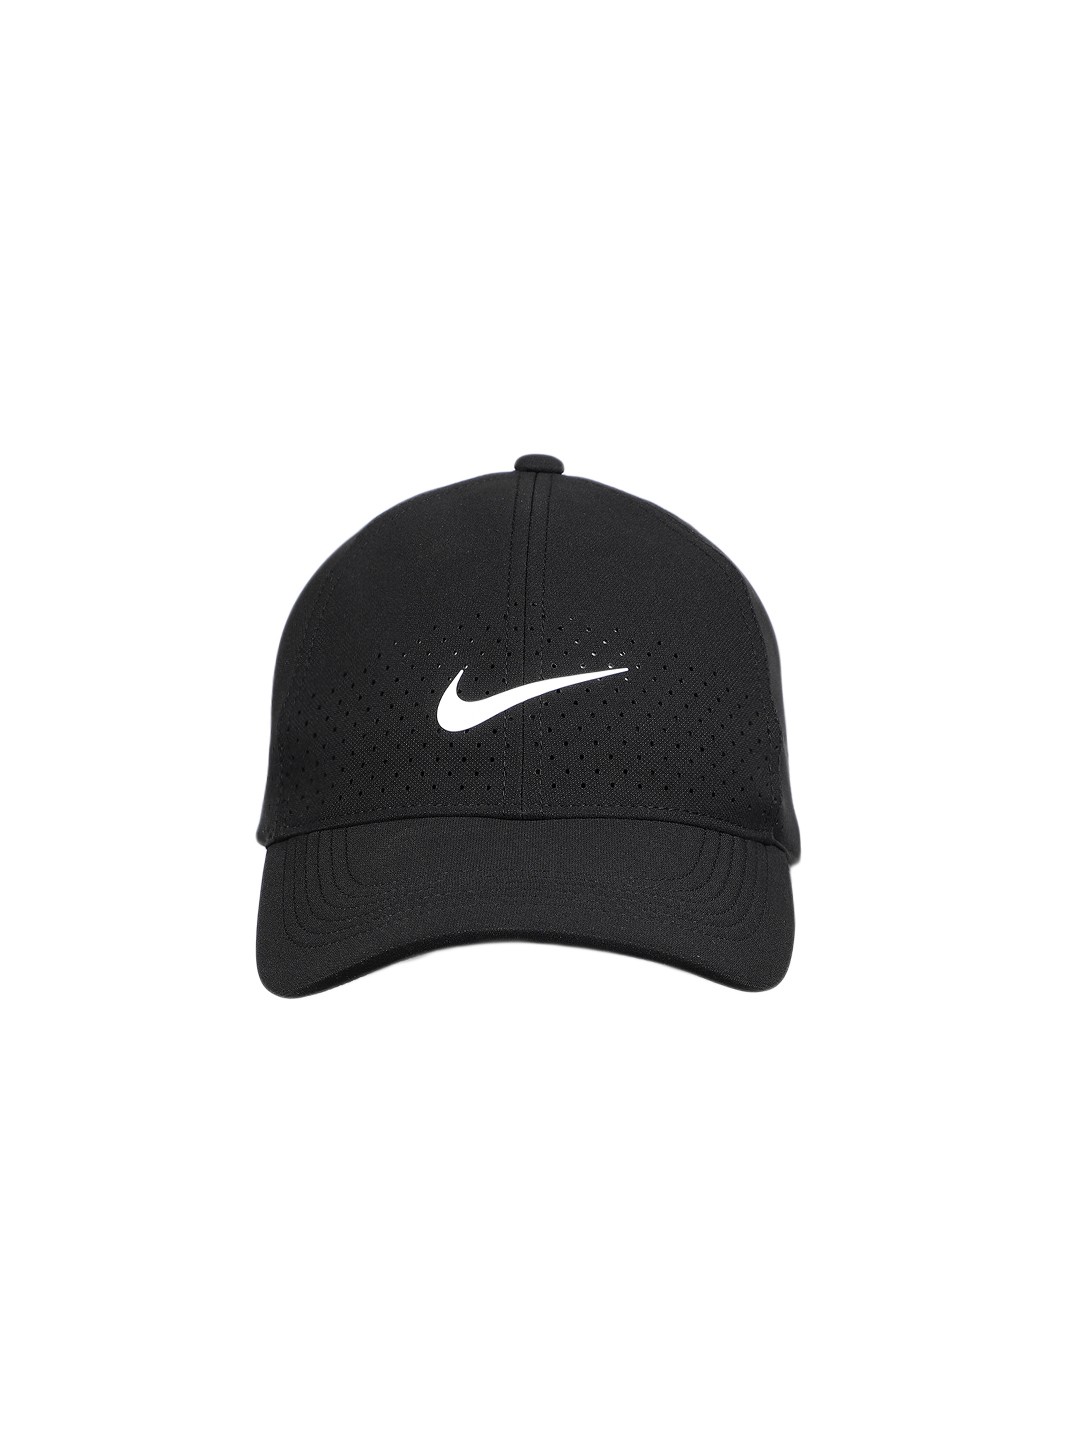 Nike Cap Price 2024 - Buy @ Lowest Price - Indiaoff